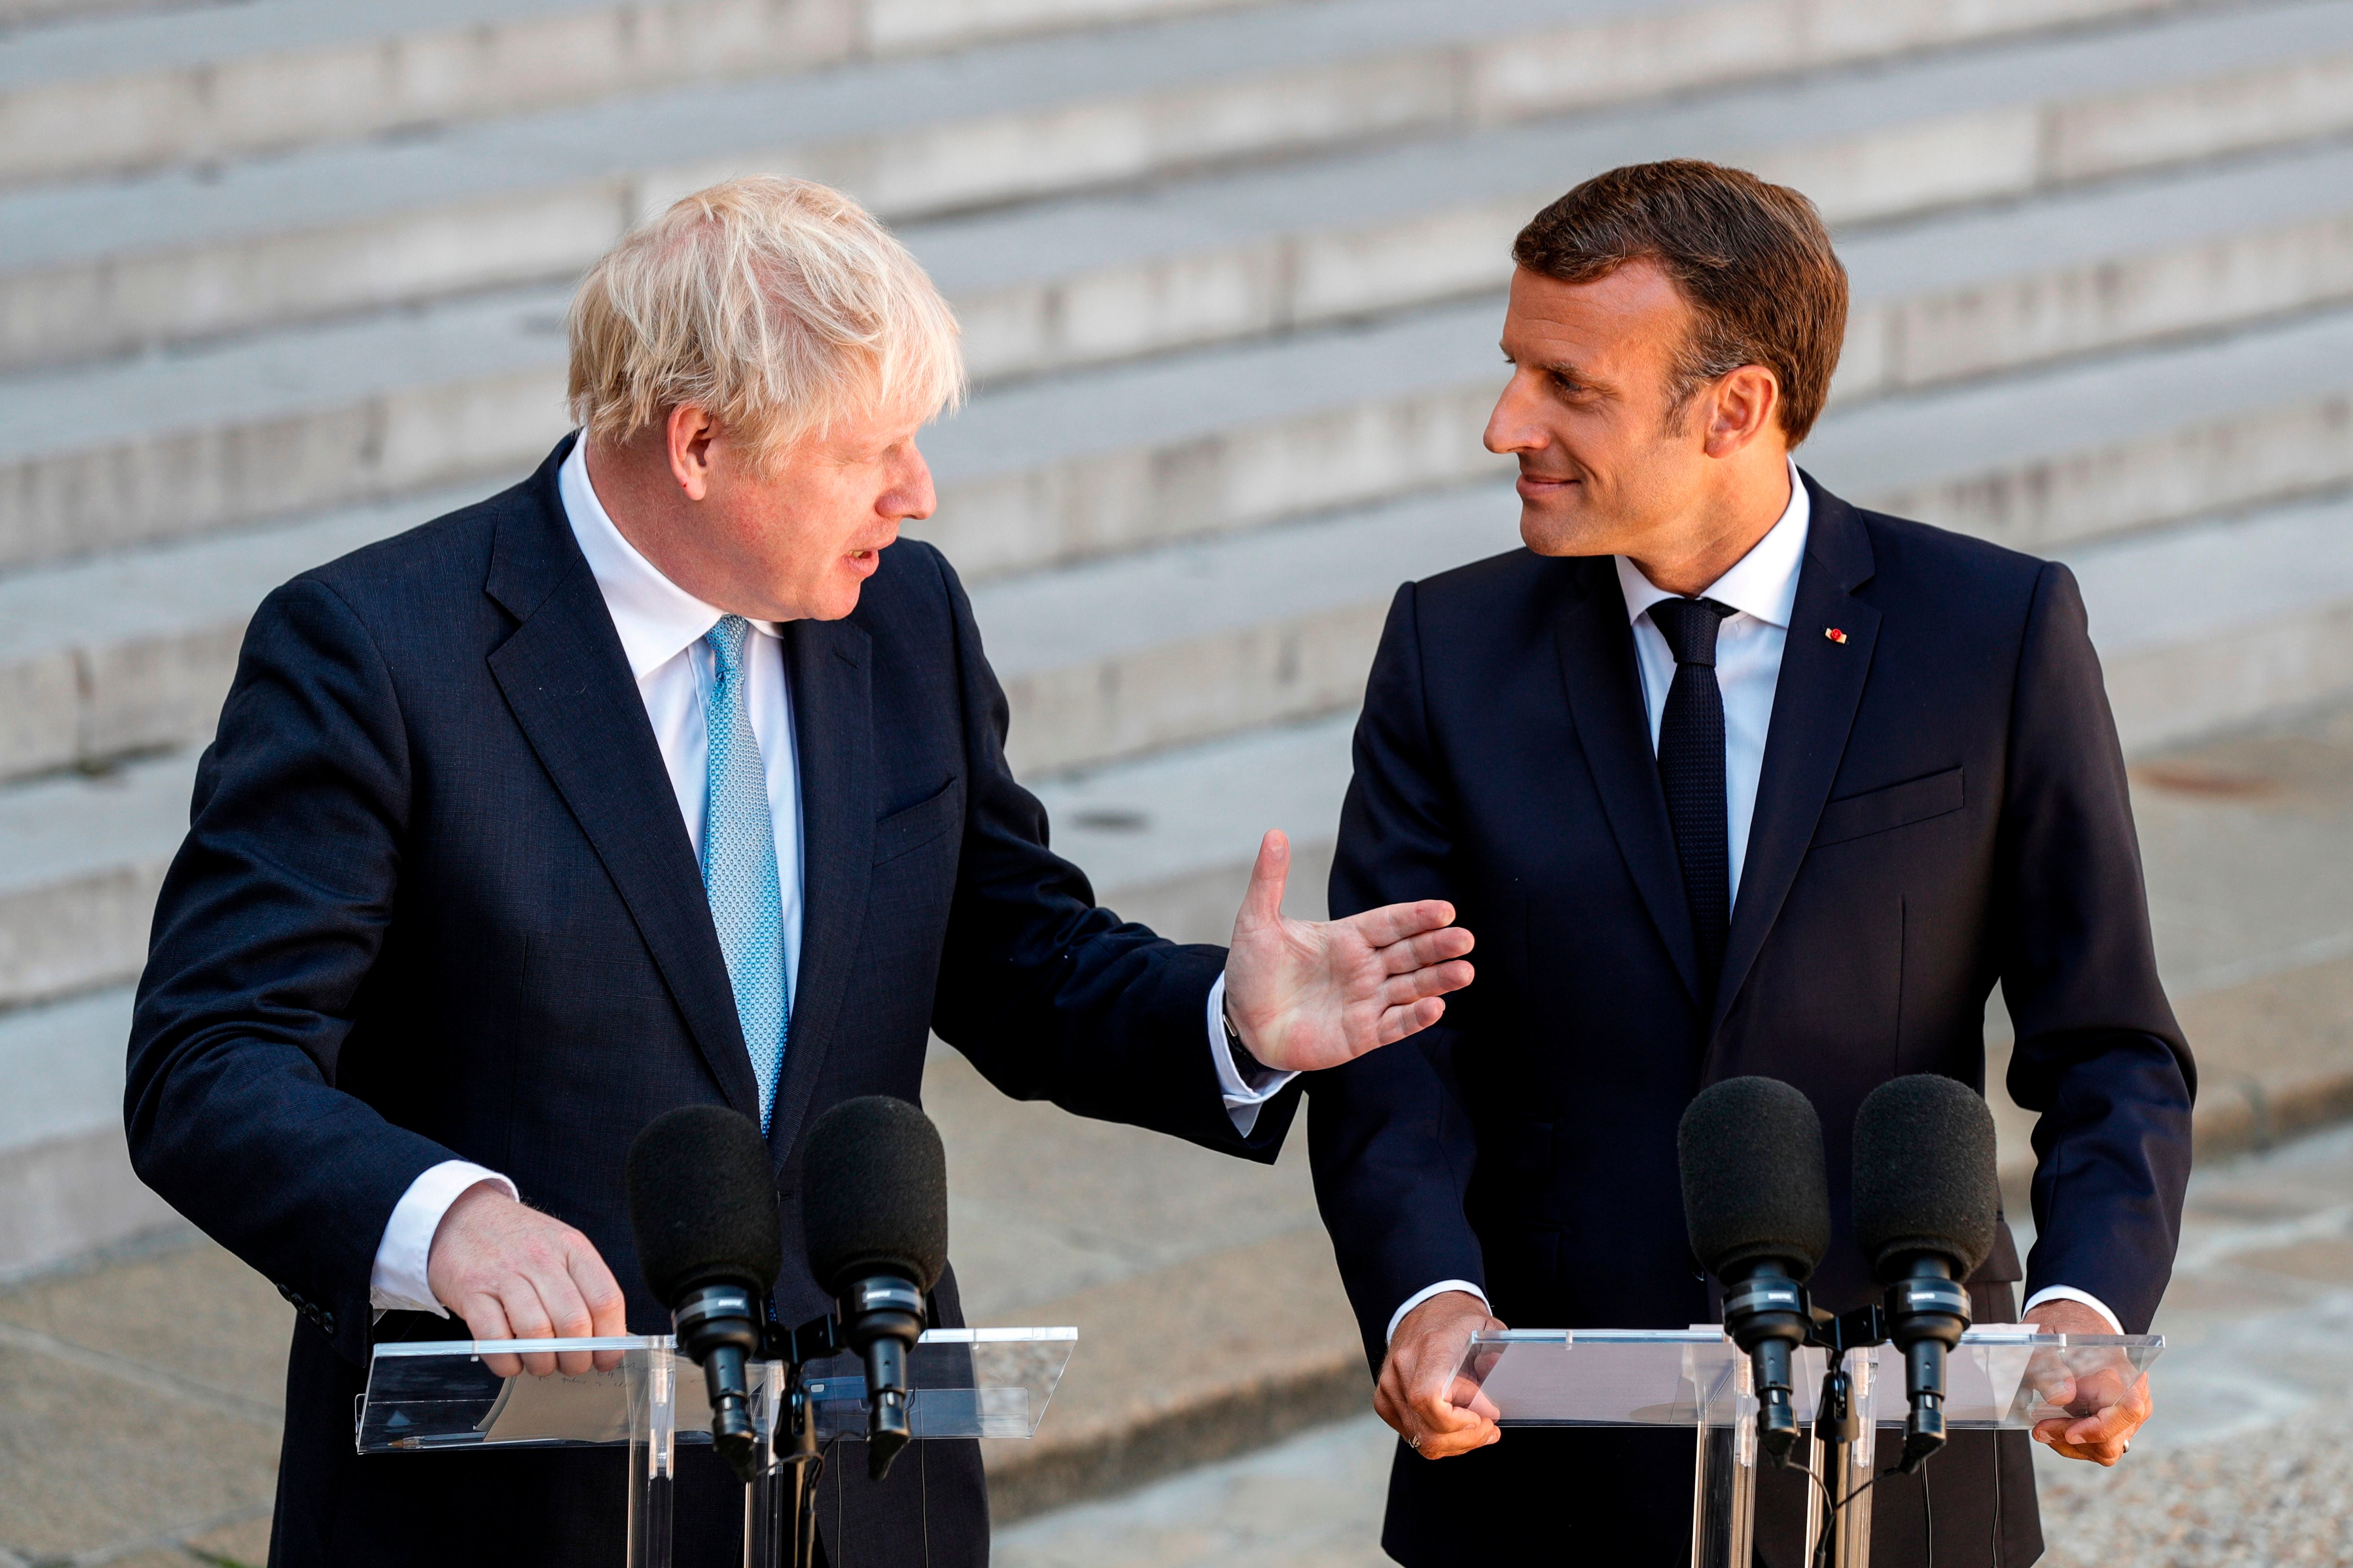 Macron is also hinting at a renegotiation of Brexit